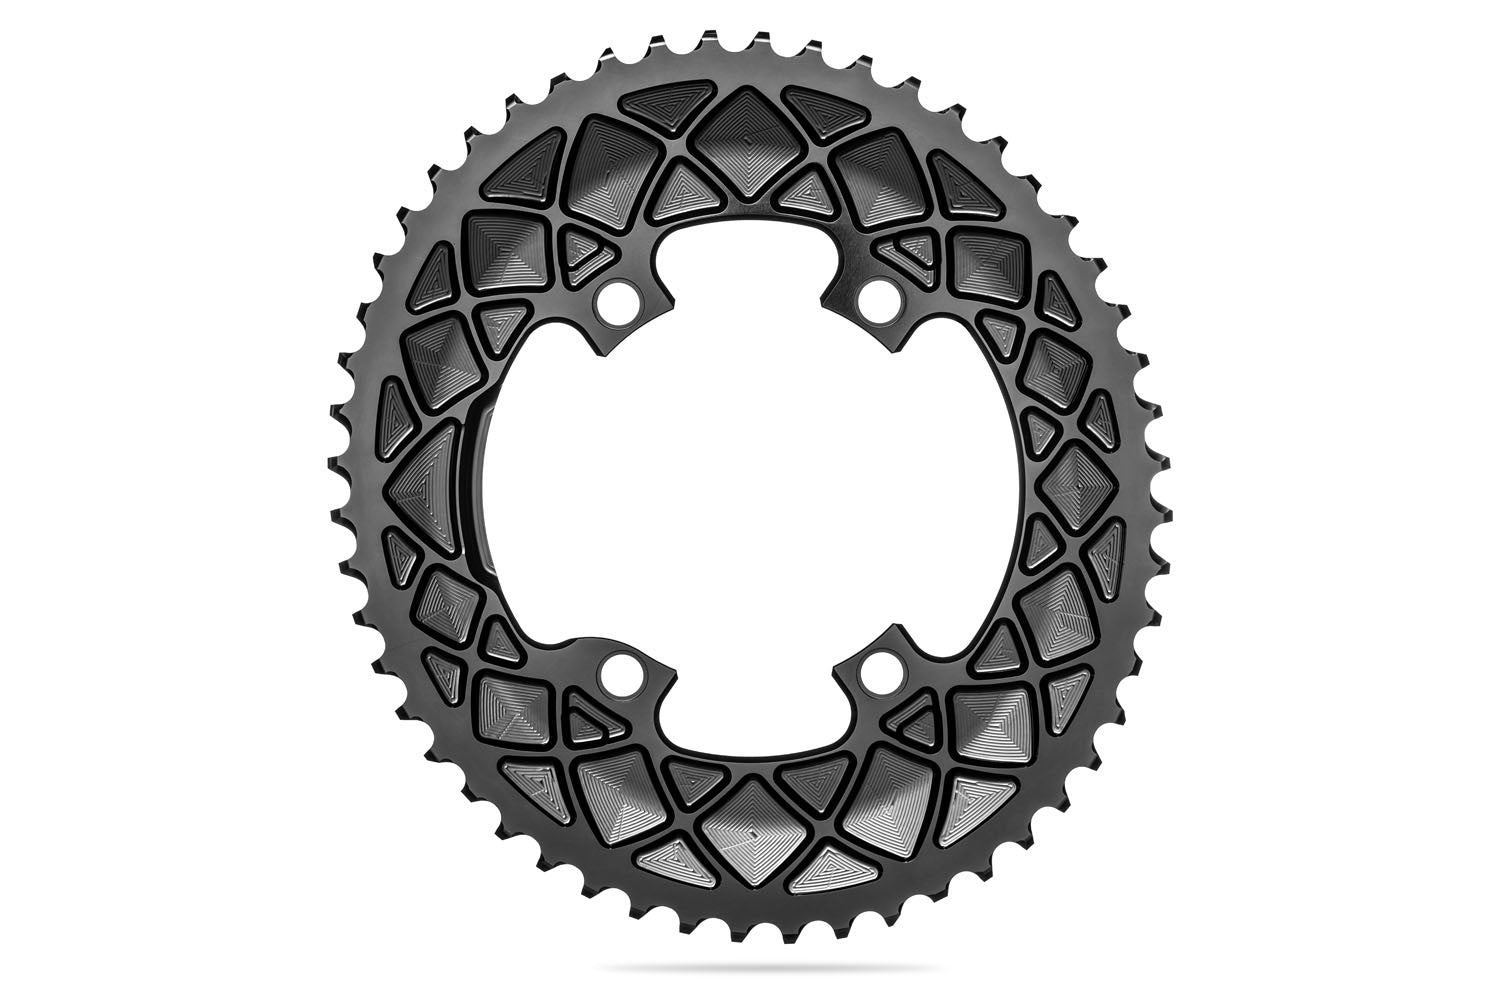 Absolute Black Chainrings - Premium Oval 9100